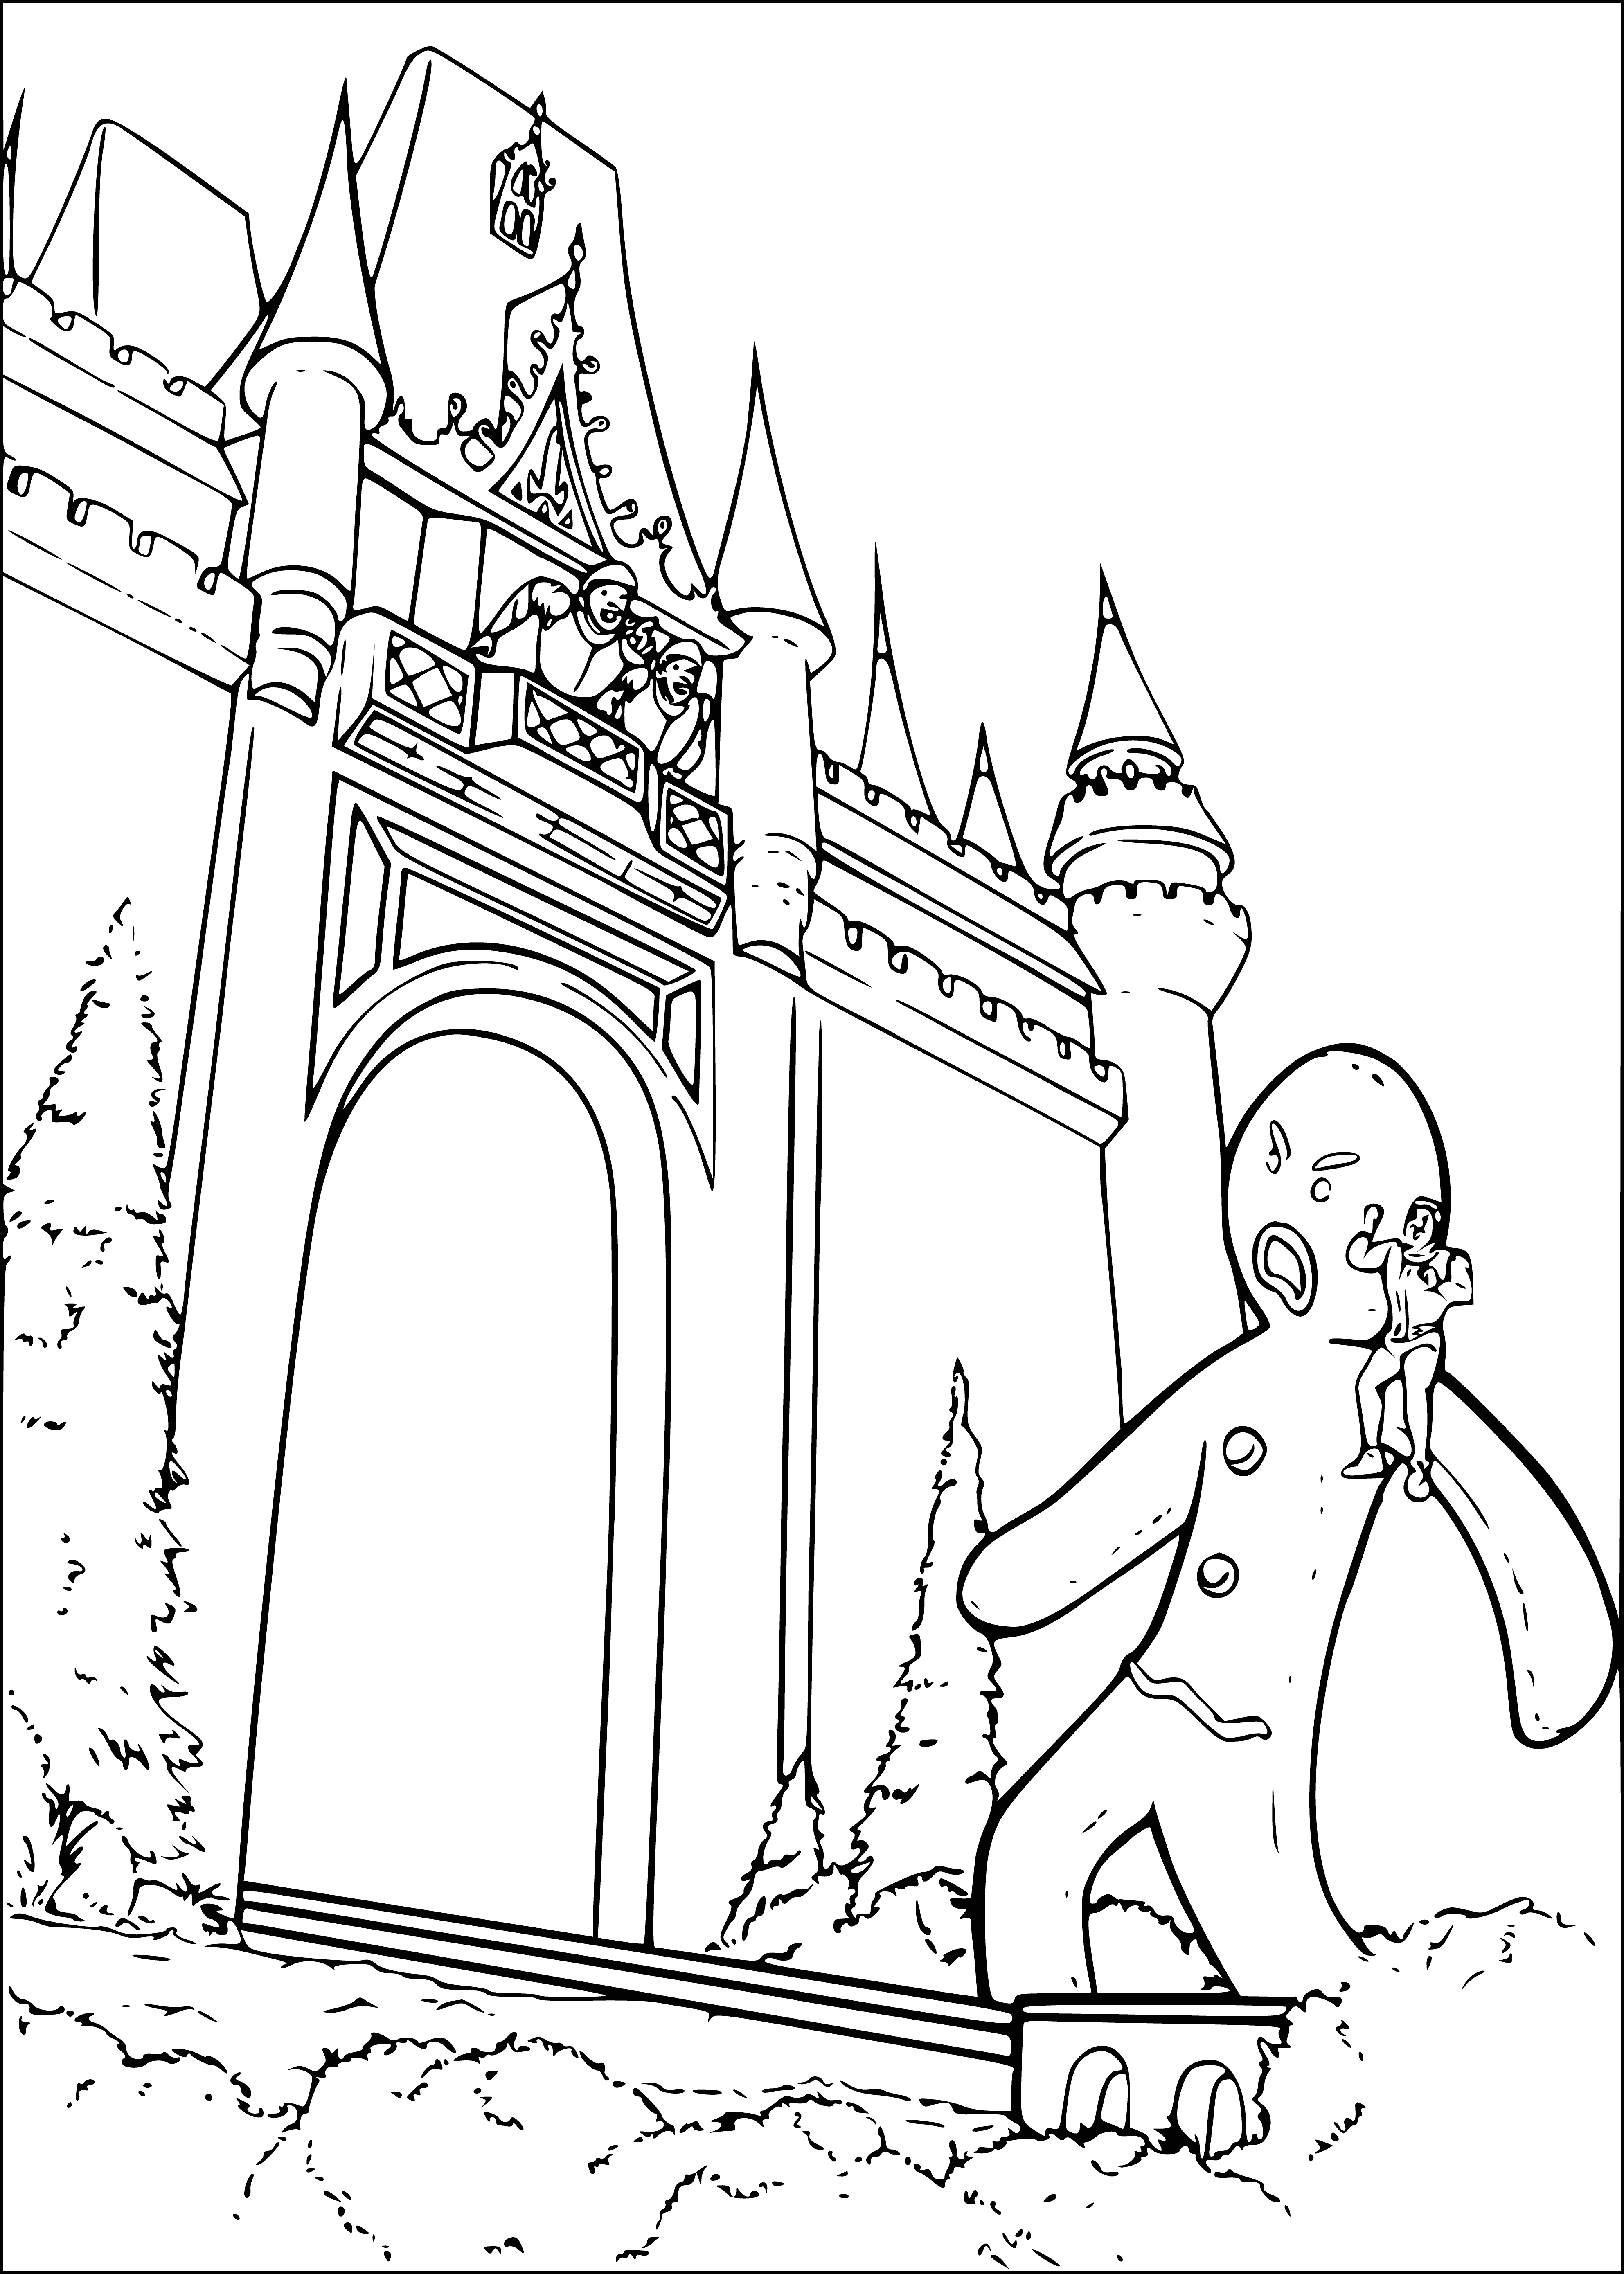 coloring page: Ogre & sandman meet in a deserted street. Ogre is muscular & carrying a stick & sack. Sandman is made of sand & looks kindly on the ogre with a look of pity.